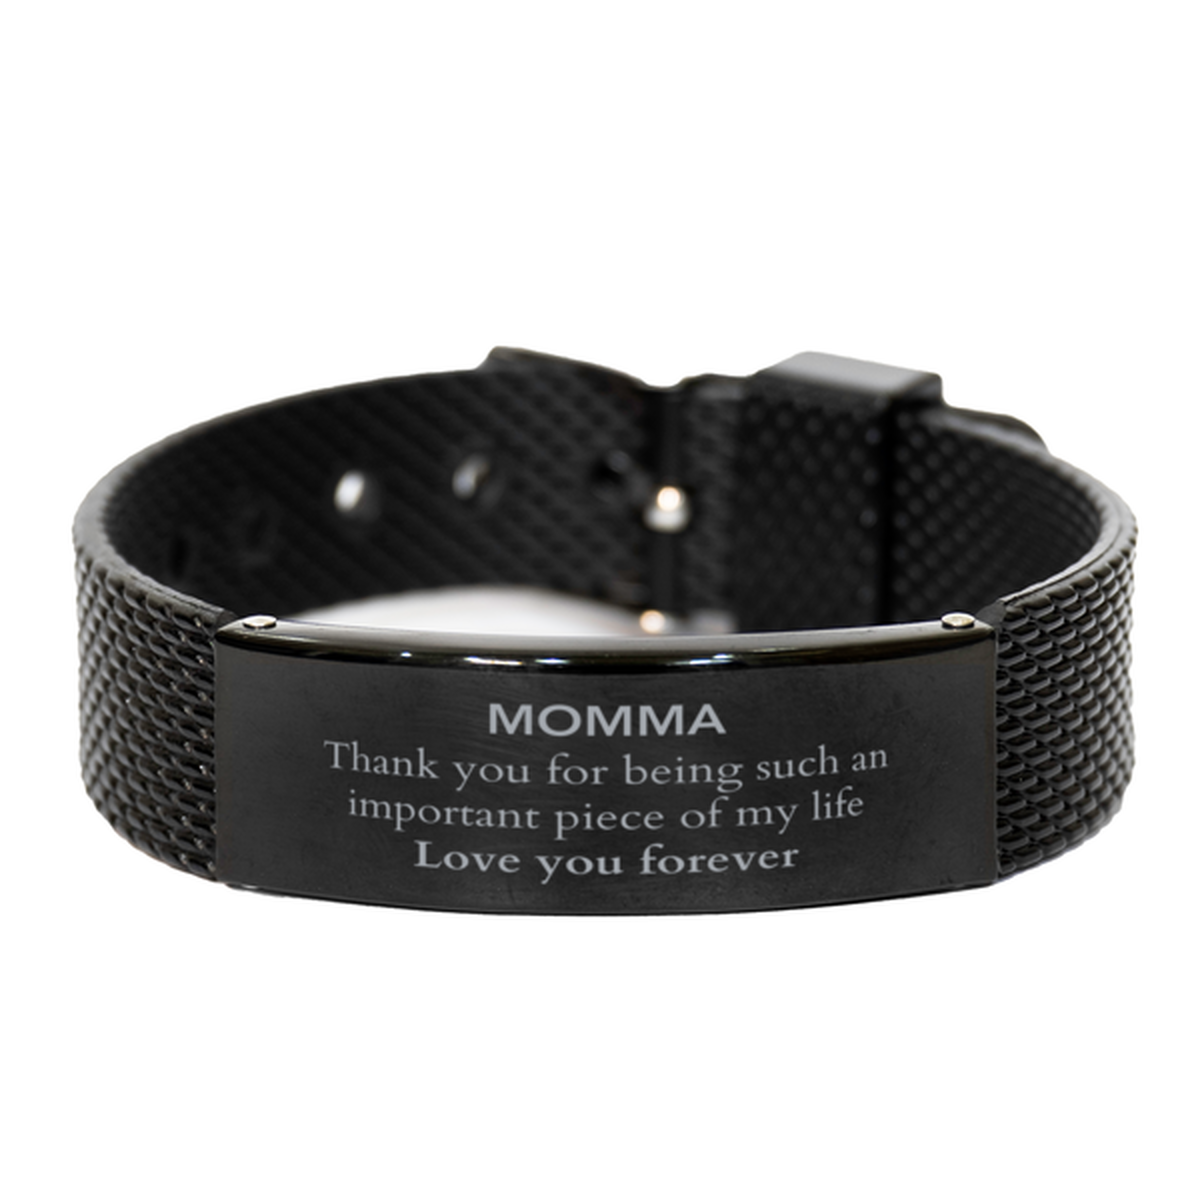 Appropriate Momma Black Shark Mesh Bracelet Epic Birthday Gifts for Momma Thank you for being such an important piece of my life Momma Christmas Mothers Fathers Day